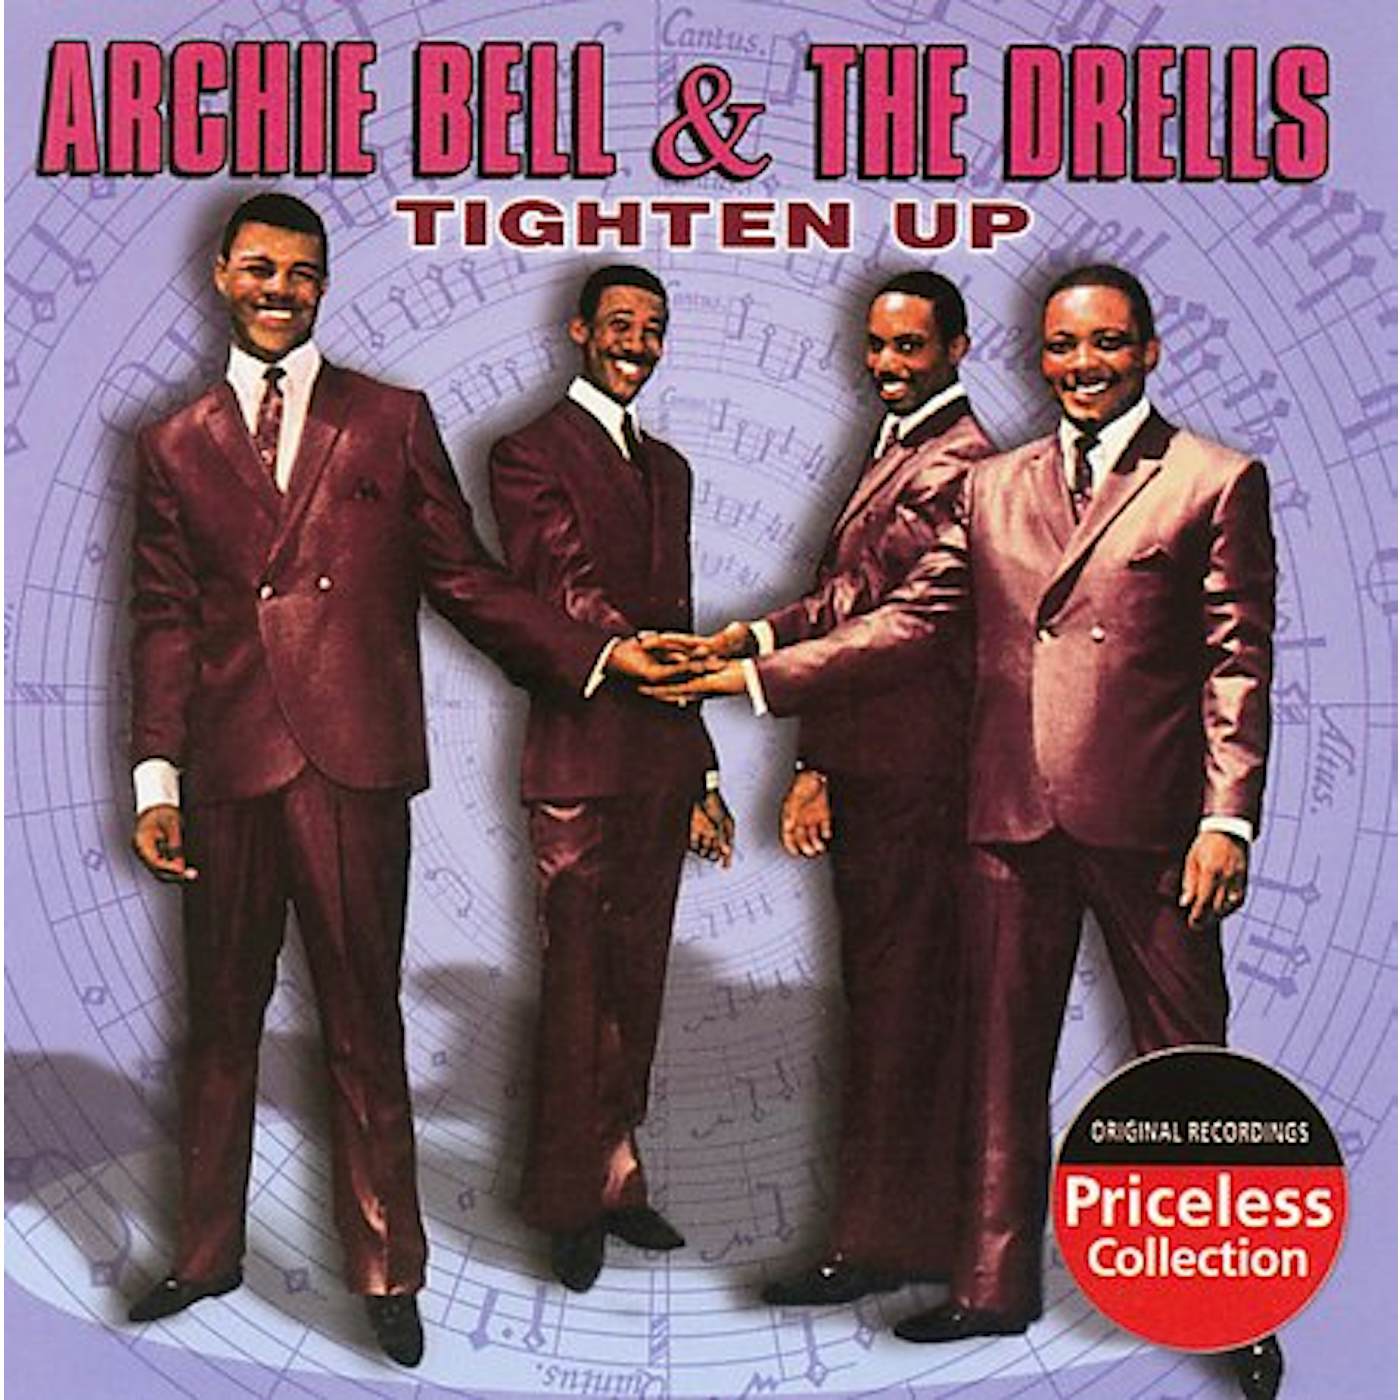 Archie Bell & The Drells TIGHTEN UP CD